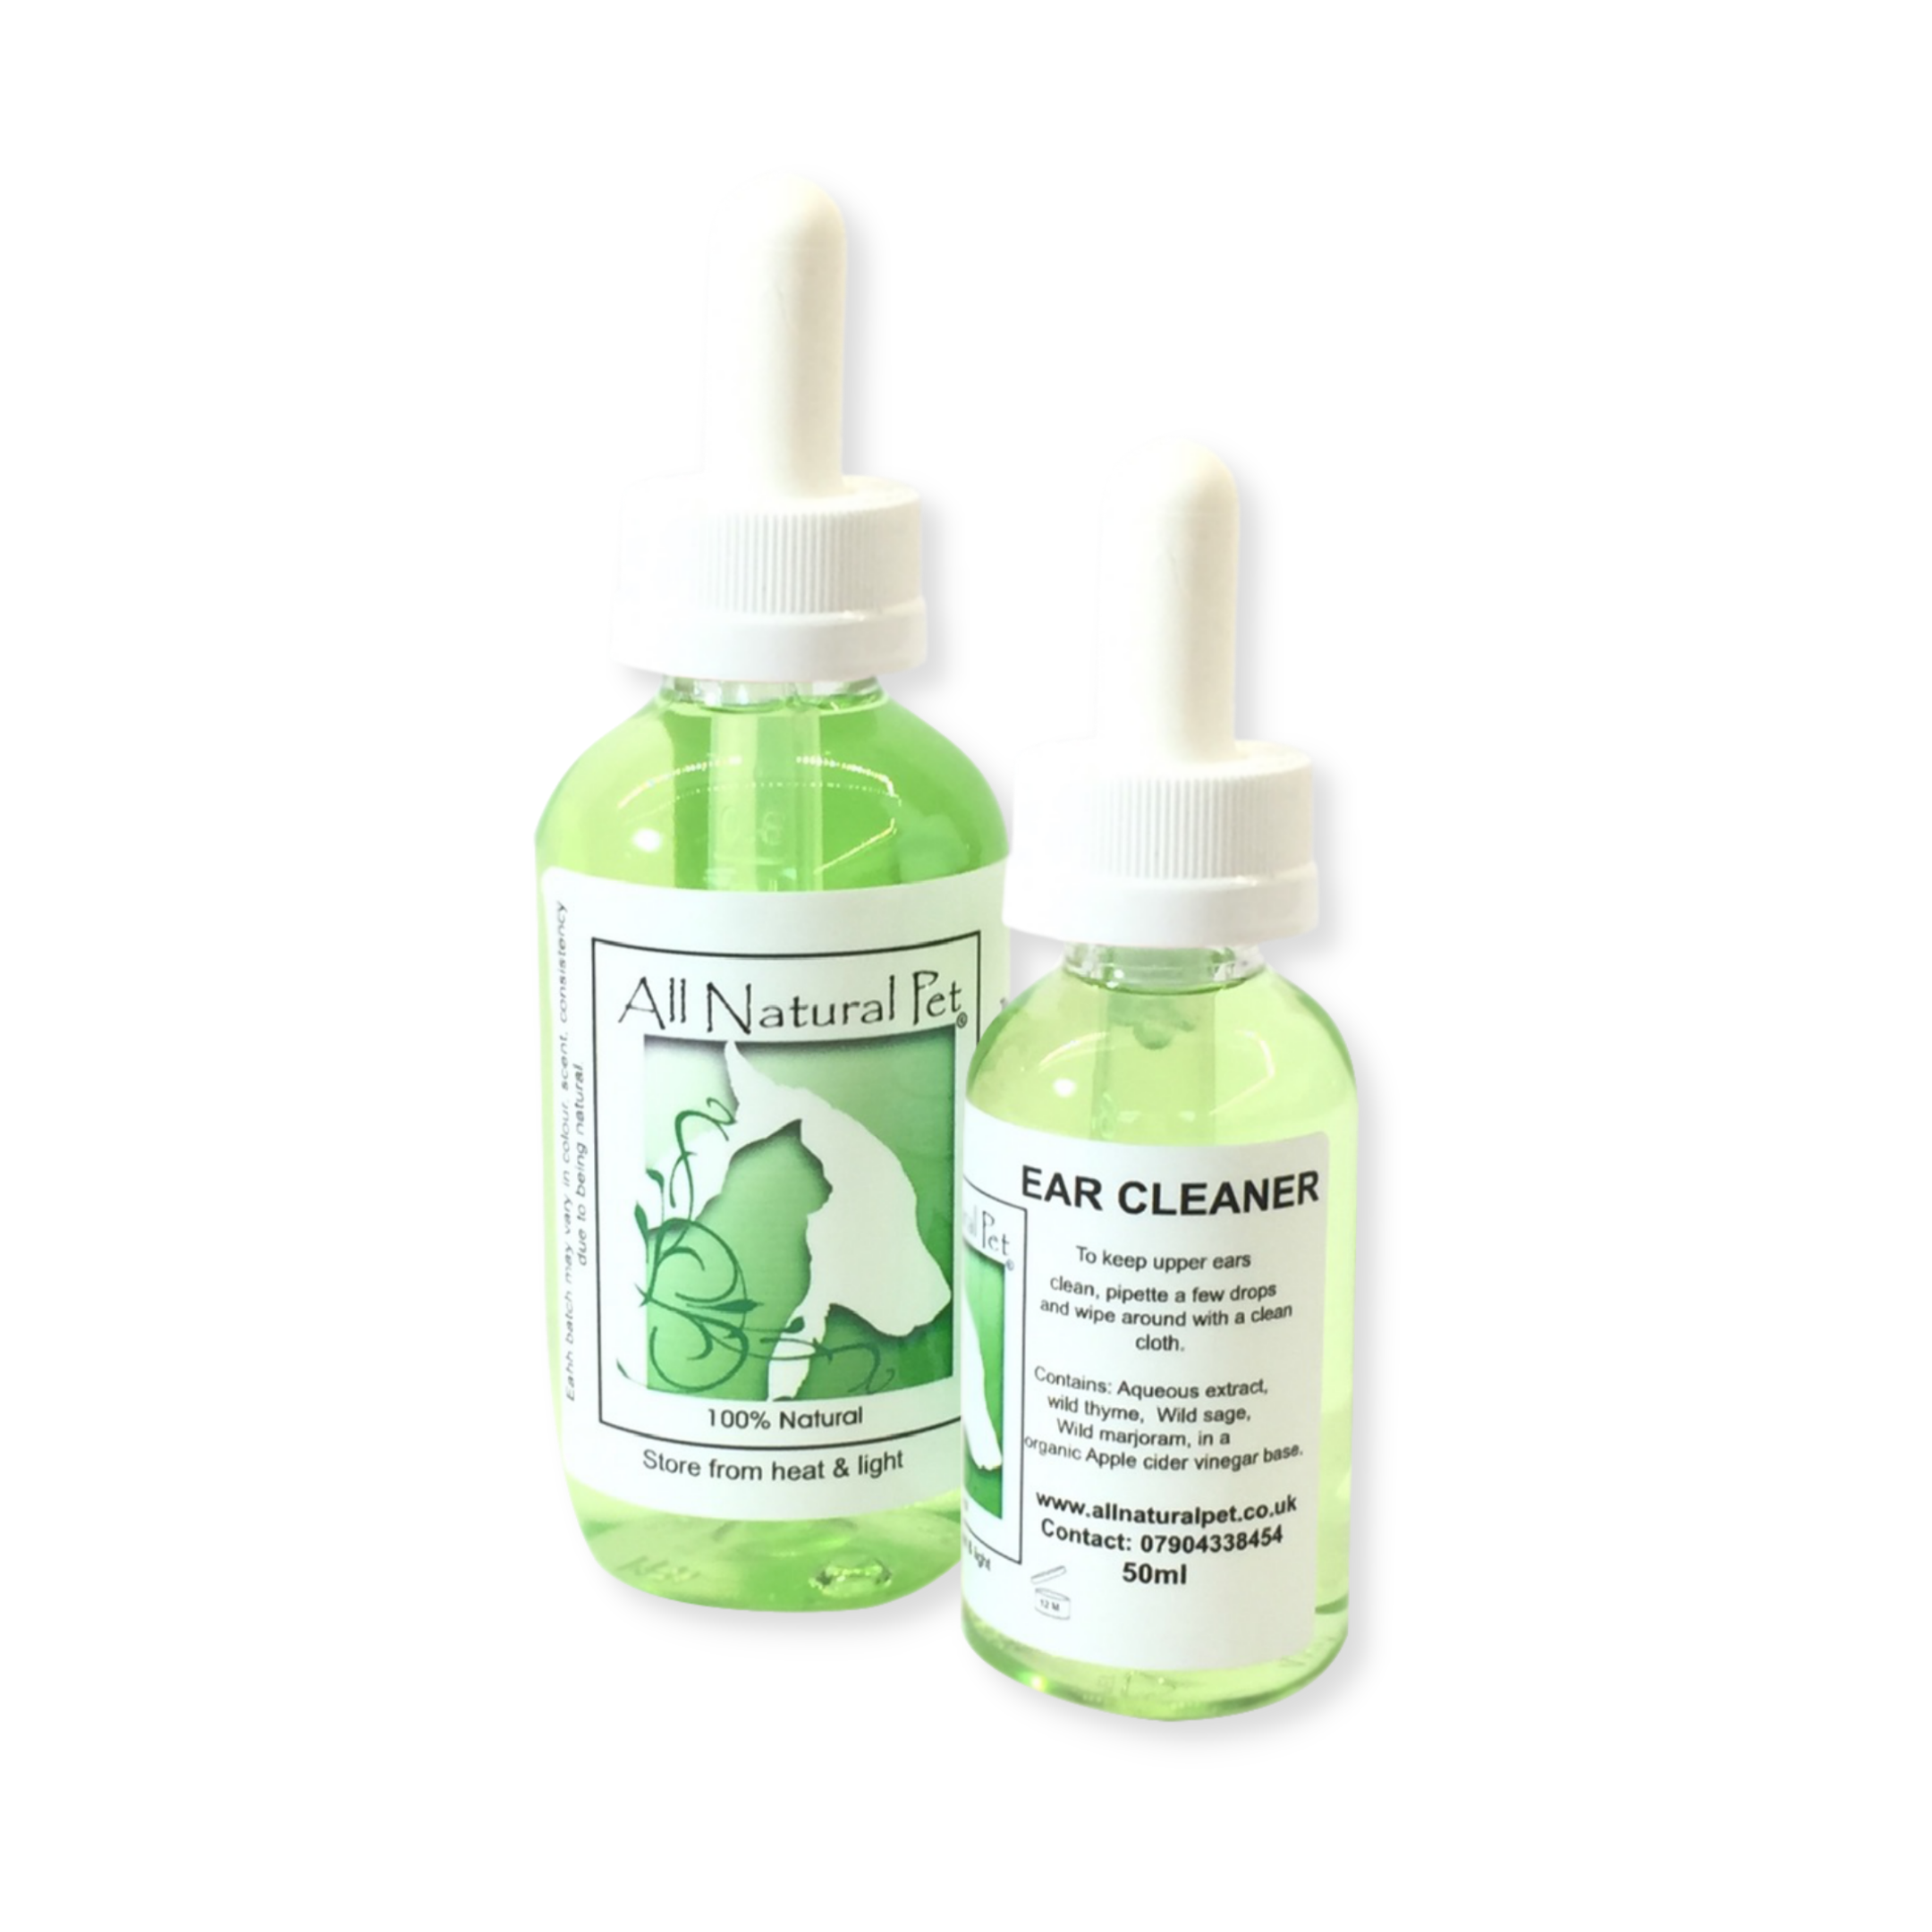 A small clear bottle with a pipette lid filled with a nice smelling green herbal solution to clean pets ears with